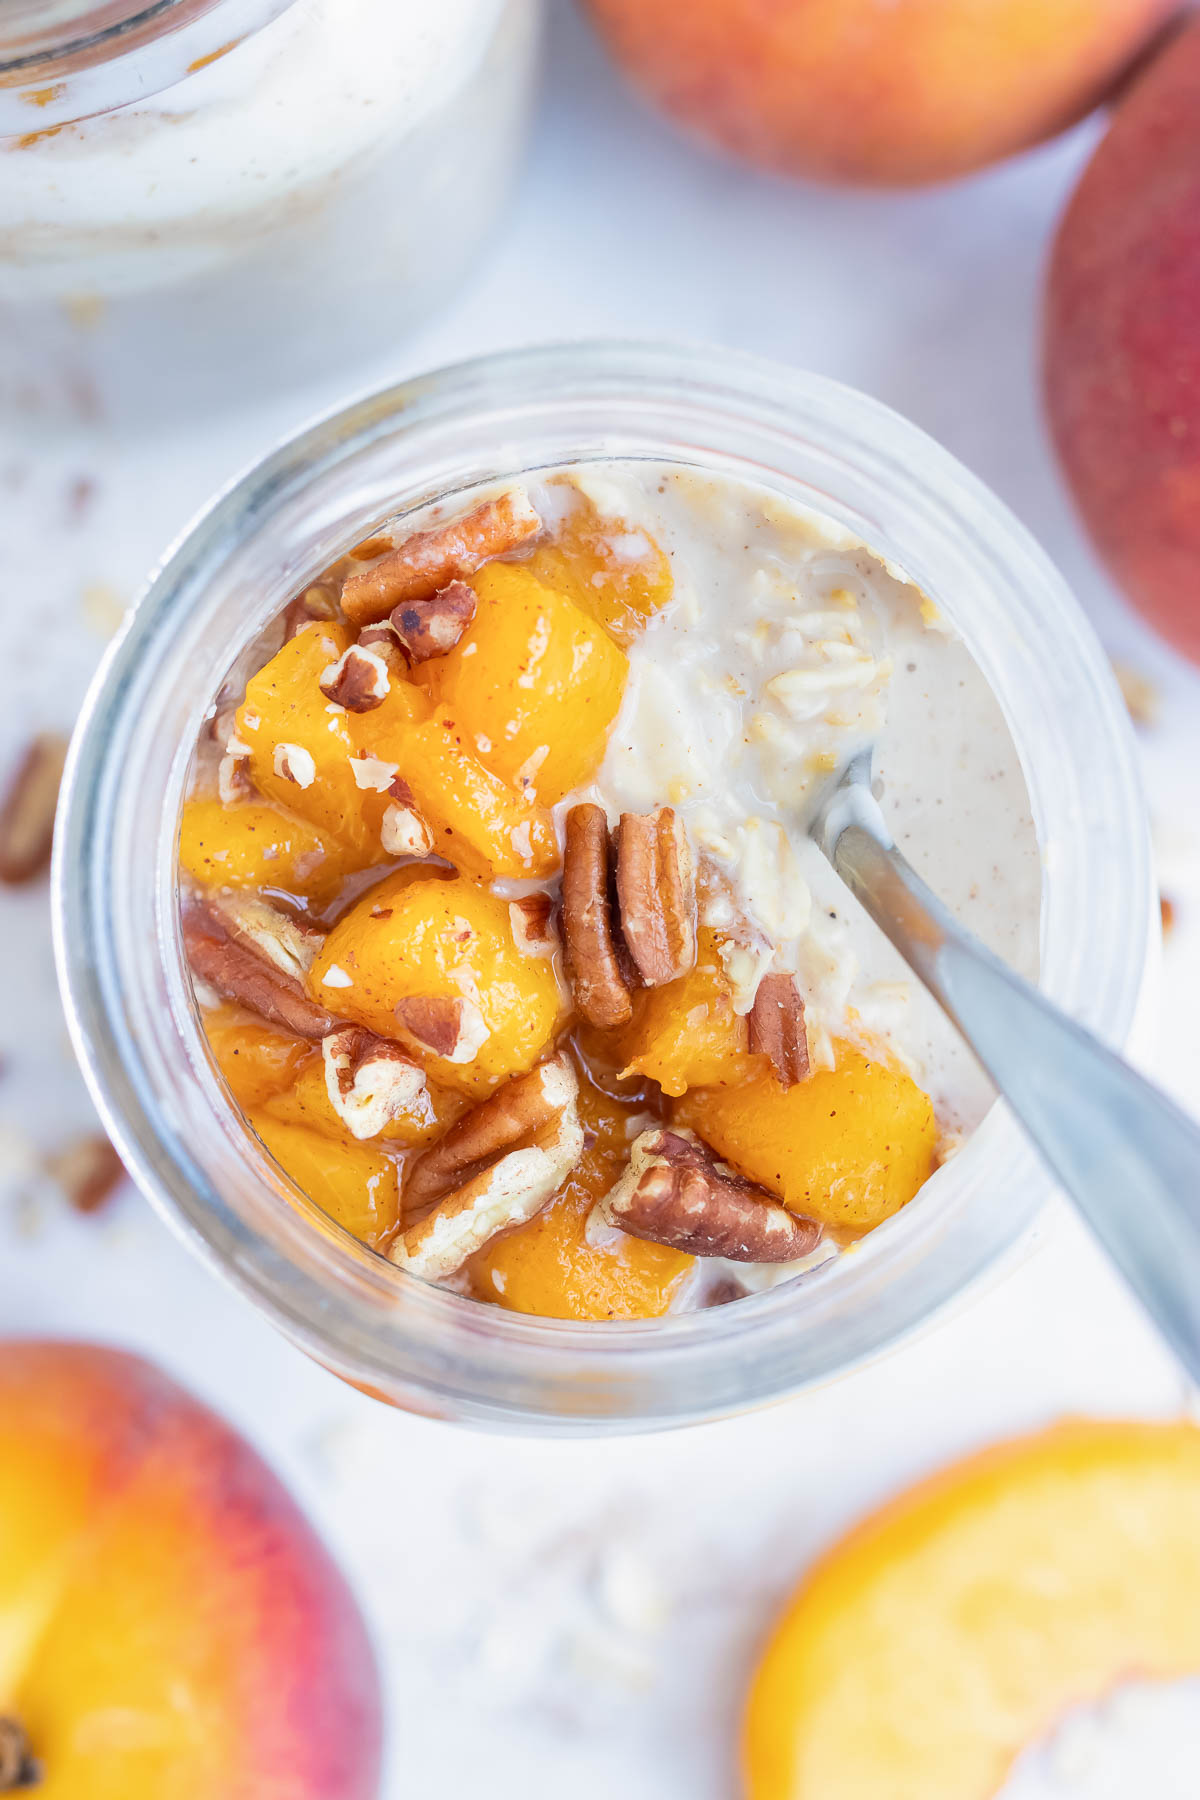 Mason jar meal prep oatmeal is made for an easy on-the-go breakfast, snack, or treat made with oats, fresh peaches, and toasted pecans.